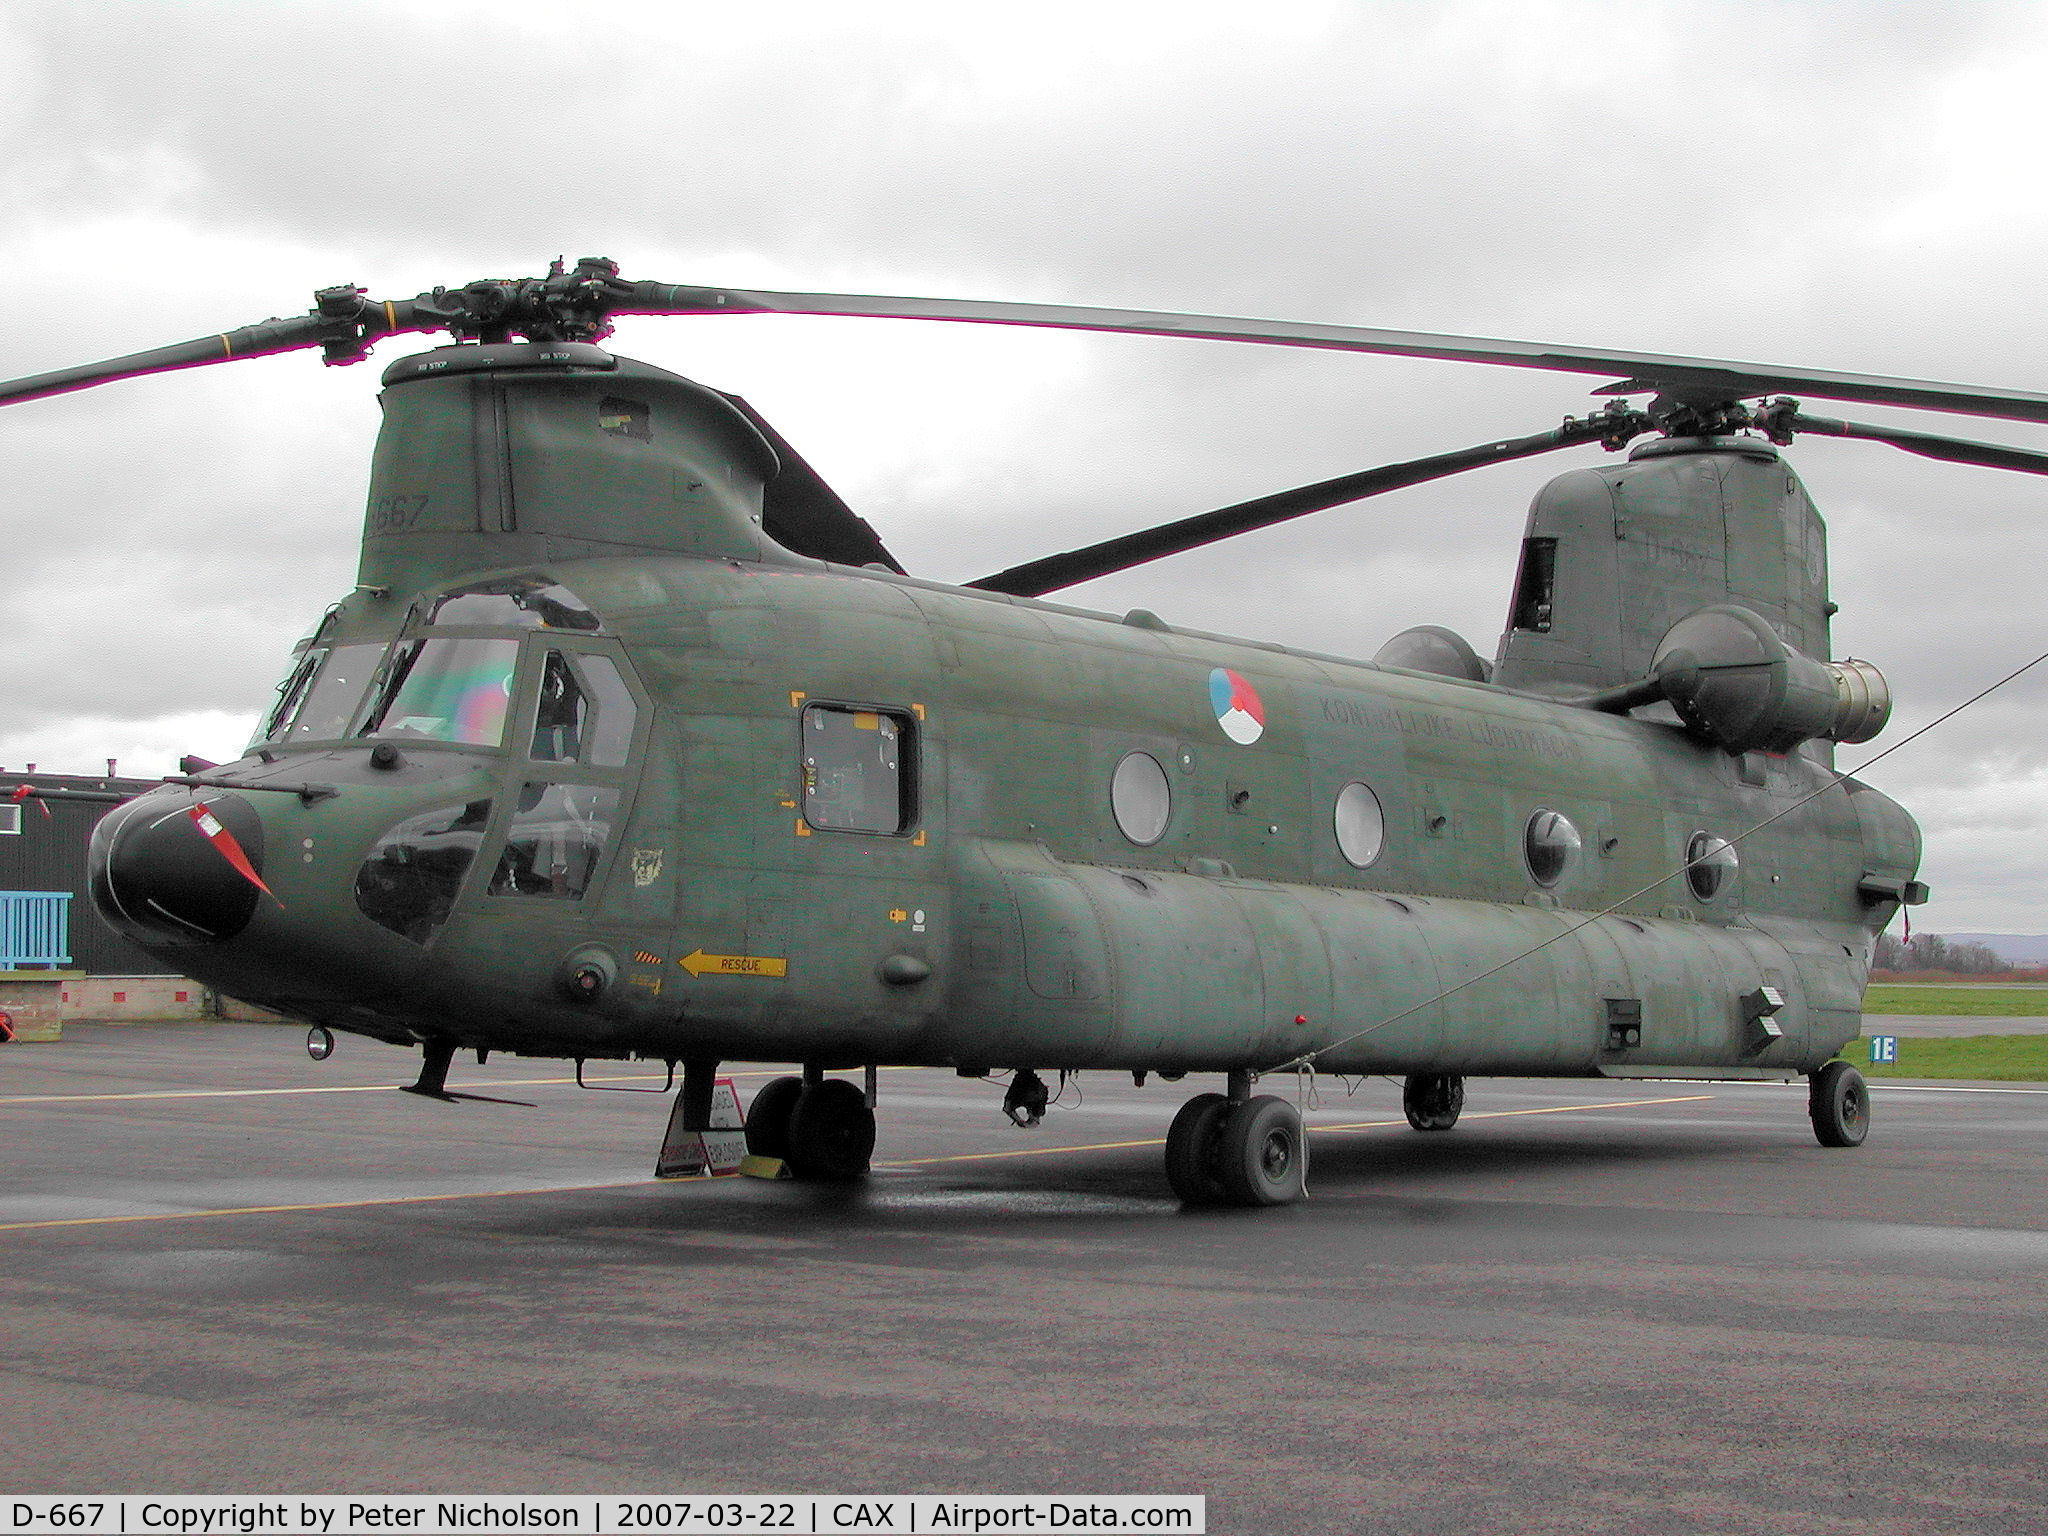 D-667, Boeing CH-47D Chinook C/N M.3667/NL-007, CH-47D Chinook, callsign Omega, of 298 Squadron Royal Netherlands Air Force as seen at Carlisle in the Summer of 2007.